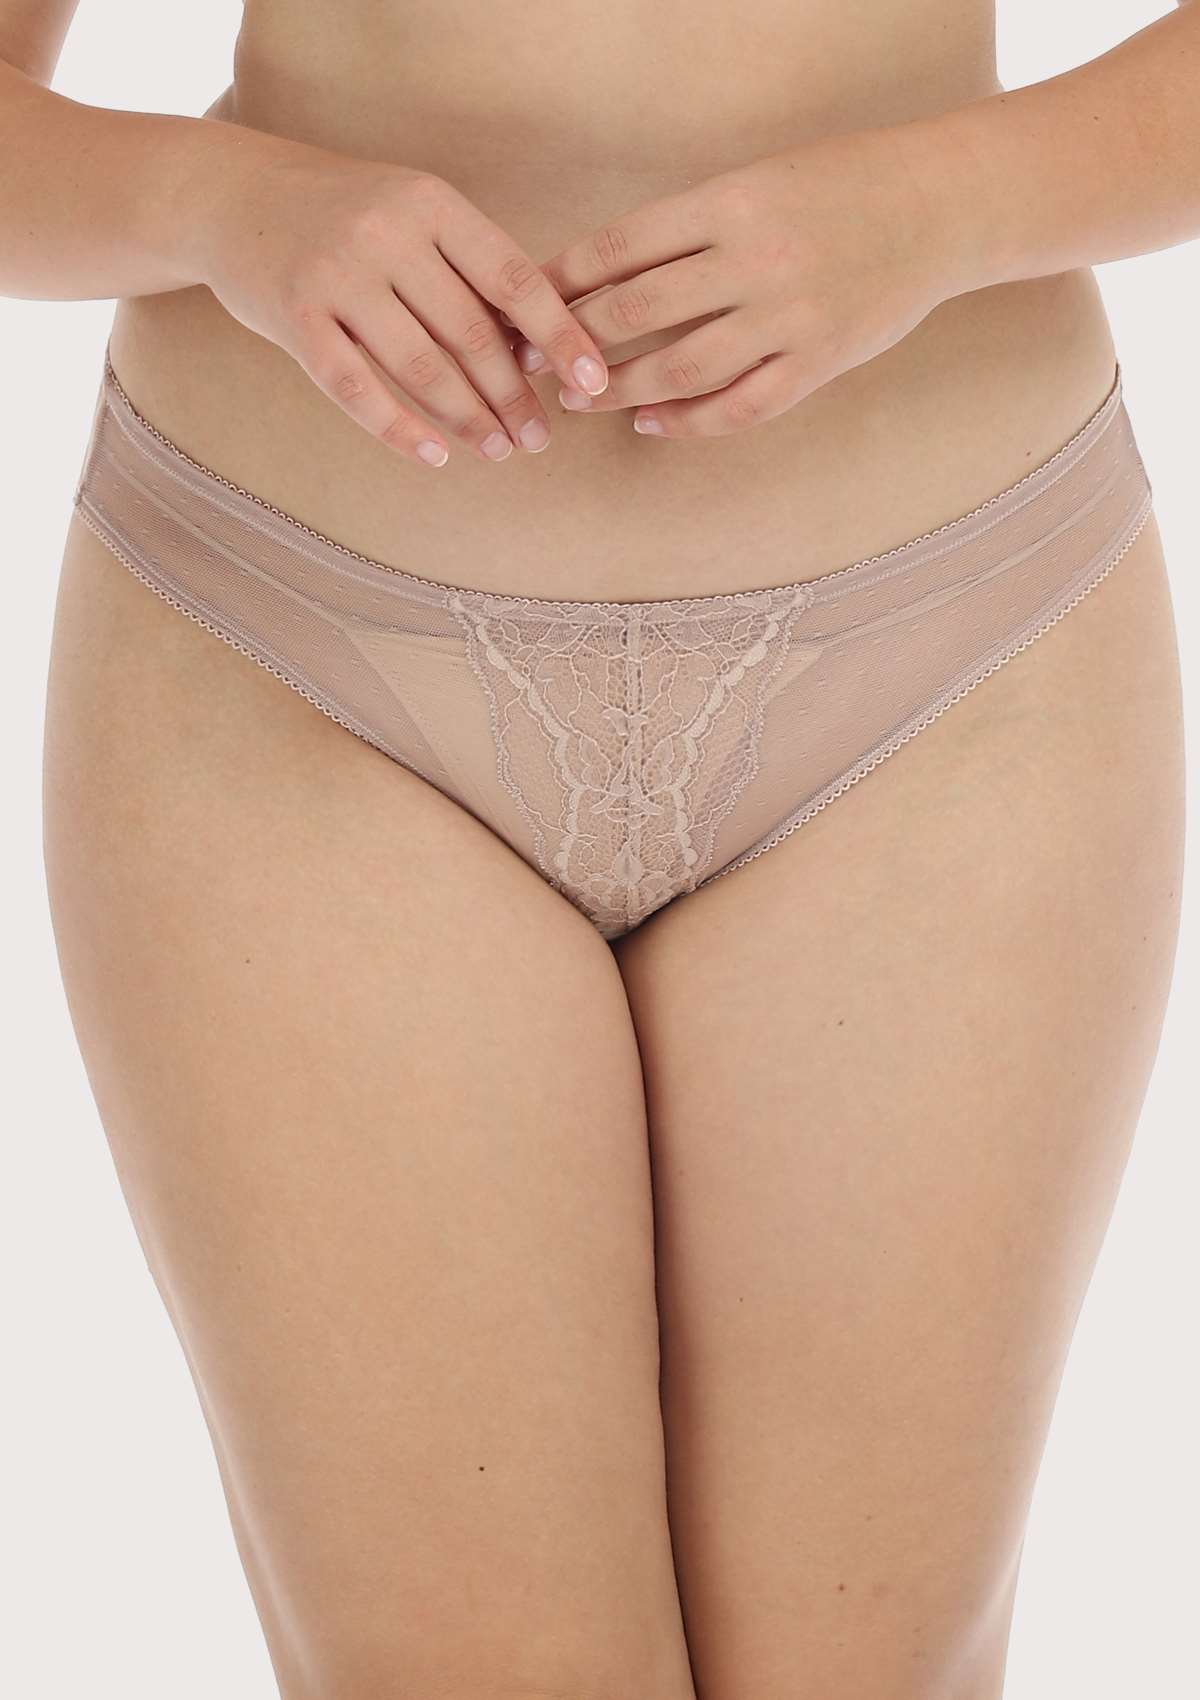 HSIA Mid-Rise Sheer Stylish Lace-Trimmed Supportive Comfy Mesh Pantie - XL / Dark Pink / Bikini